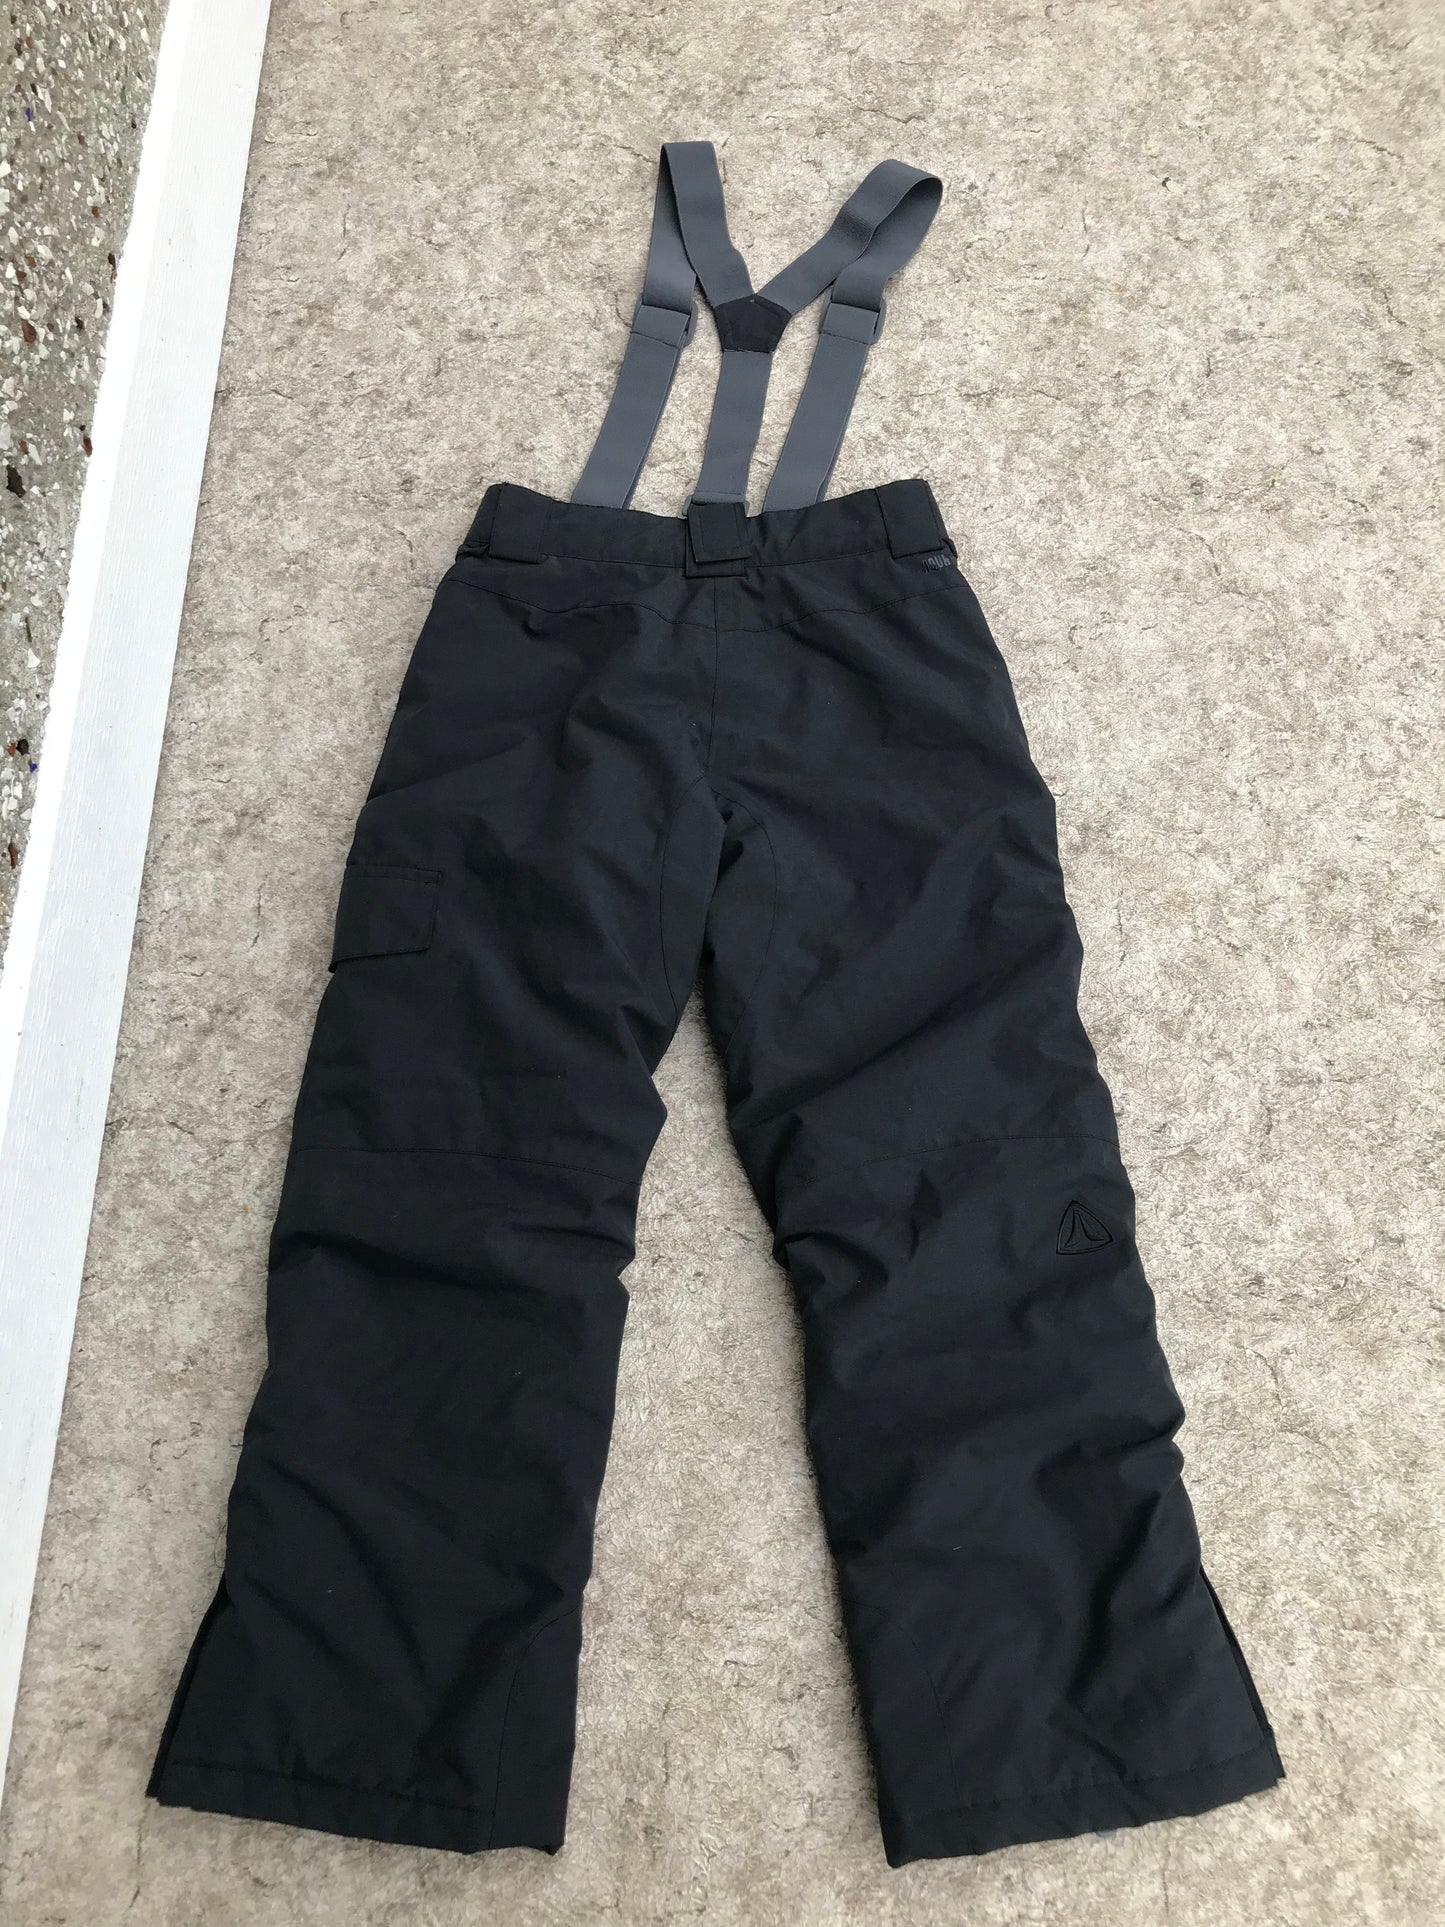 Snow Pants Child Size 10-12 Firefly Black with Adjustable Straps New Demo Model